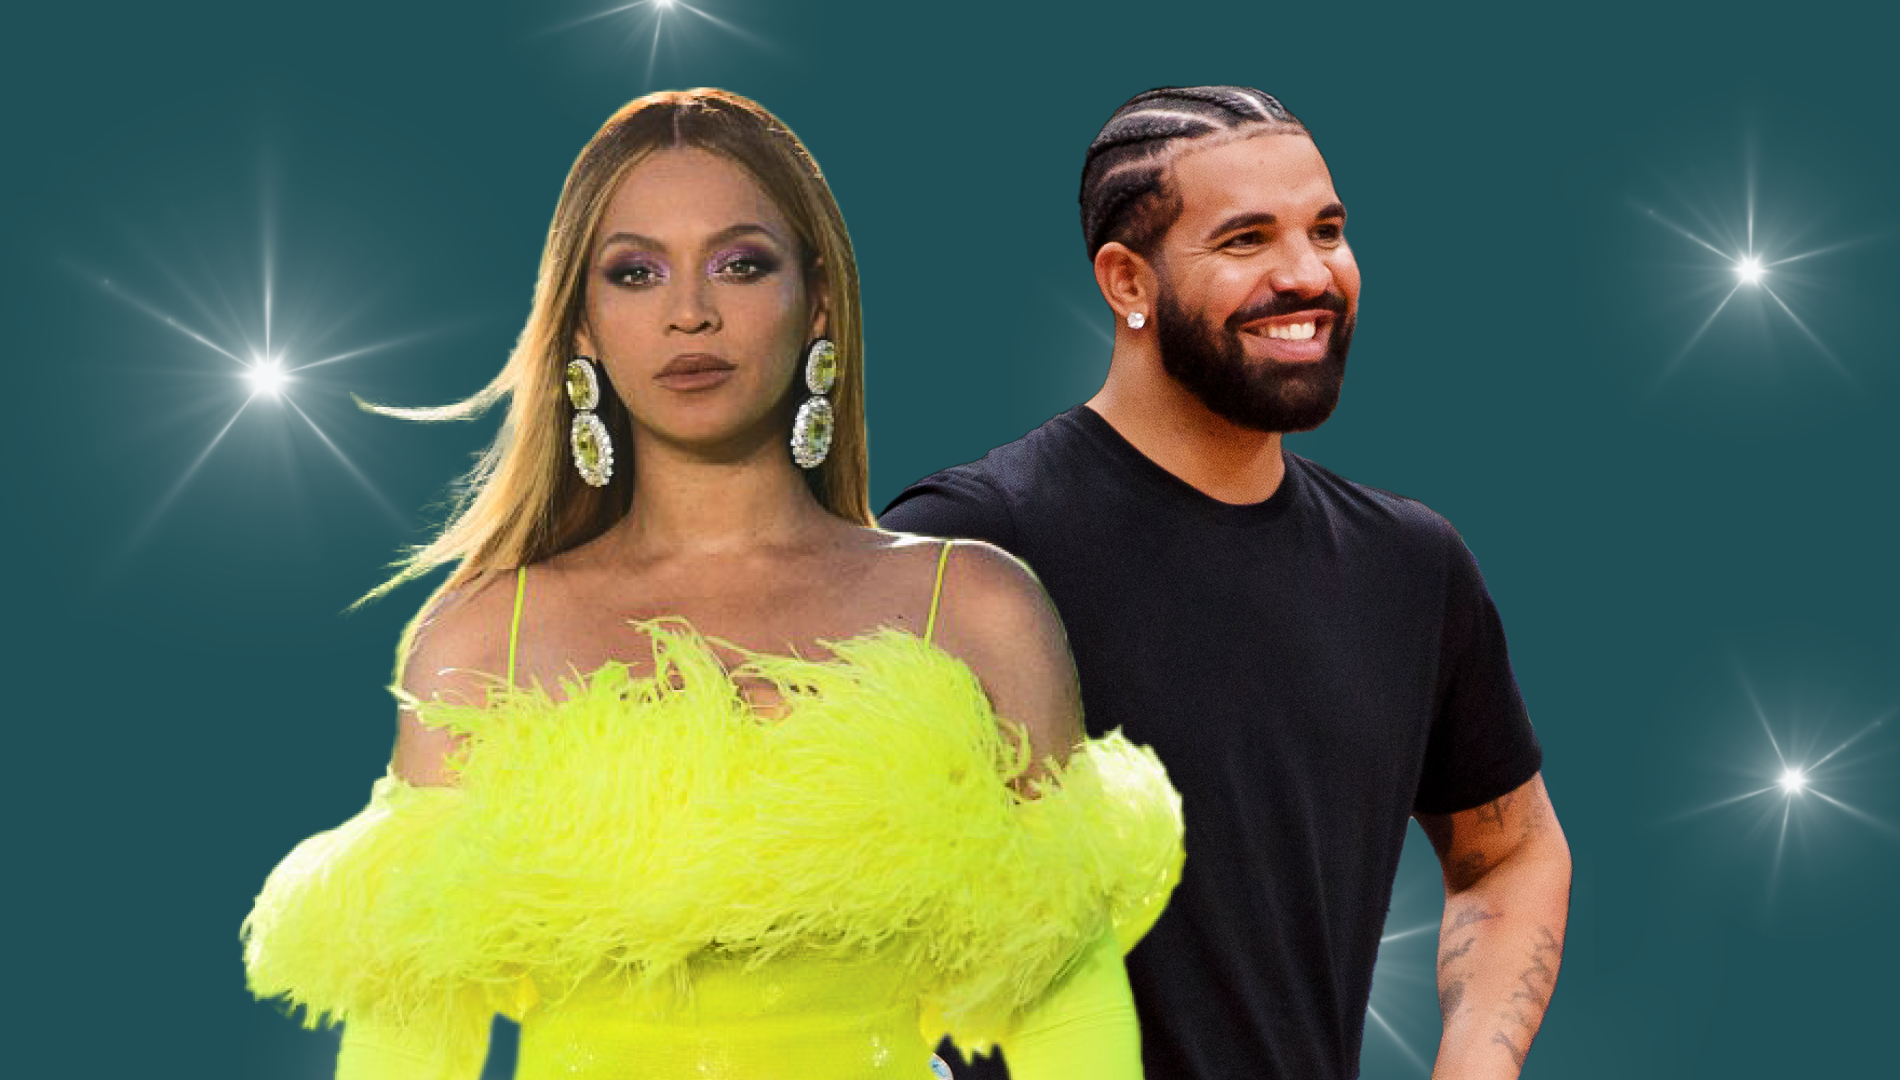 Pop Cultured with theSkimm promo image for June 28, 2022 featuring photos of Beyonce and Drake.